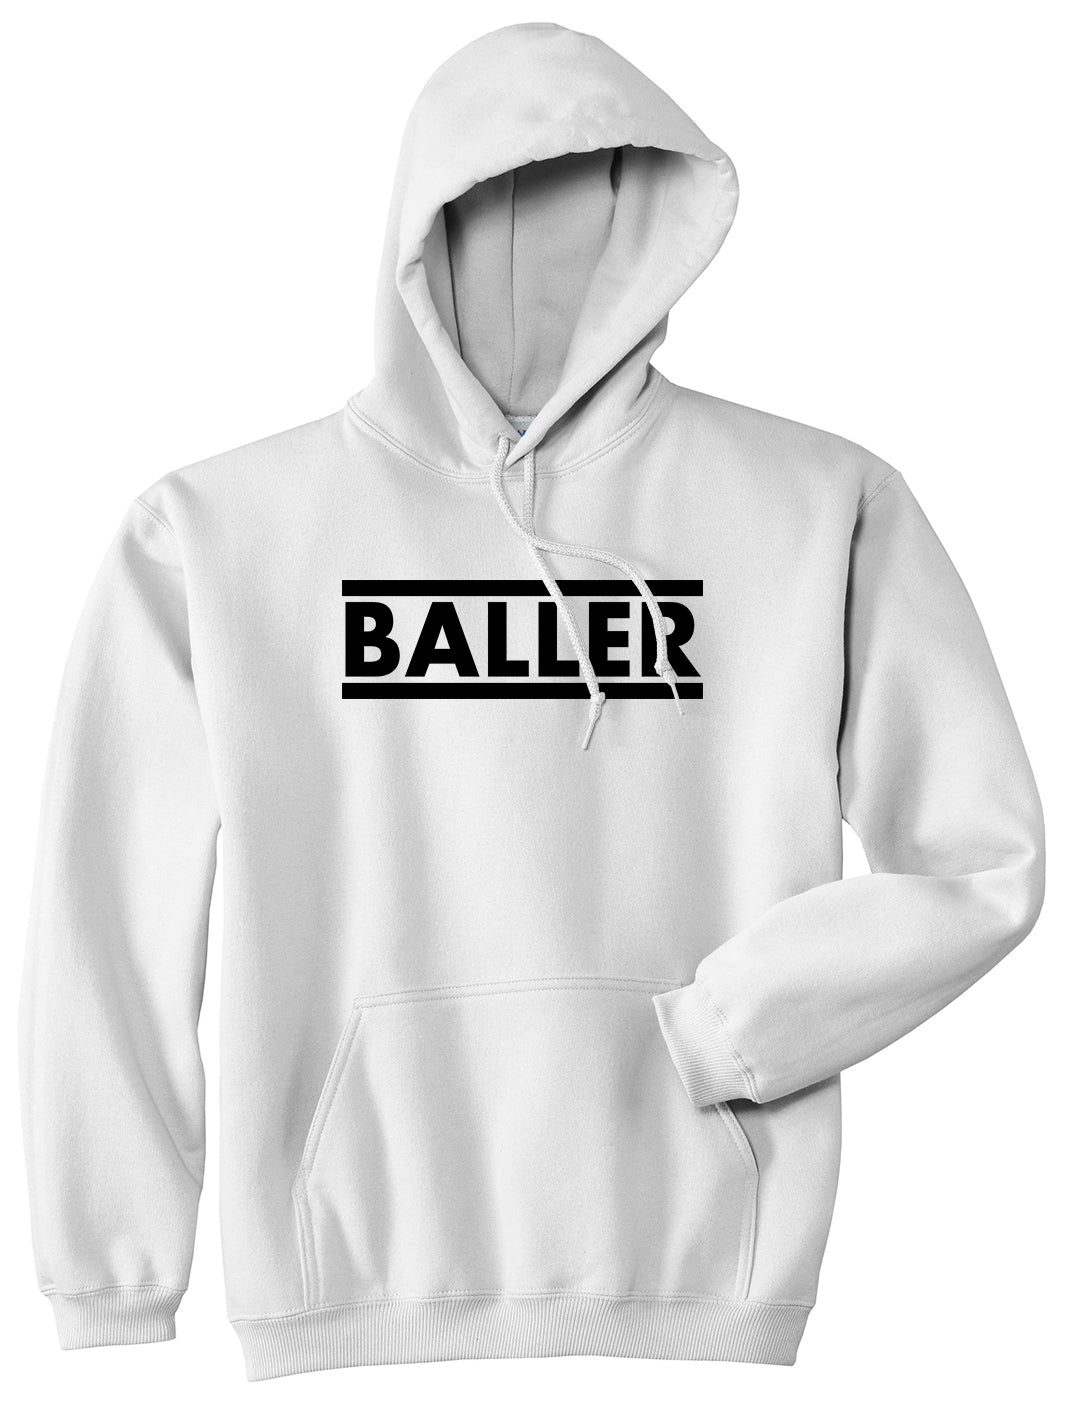 Baller White Pullover Hoodie by Kings Of NY